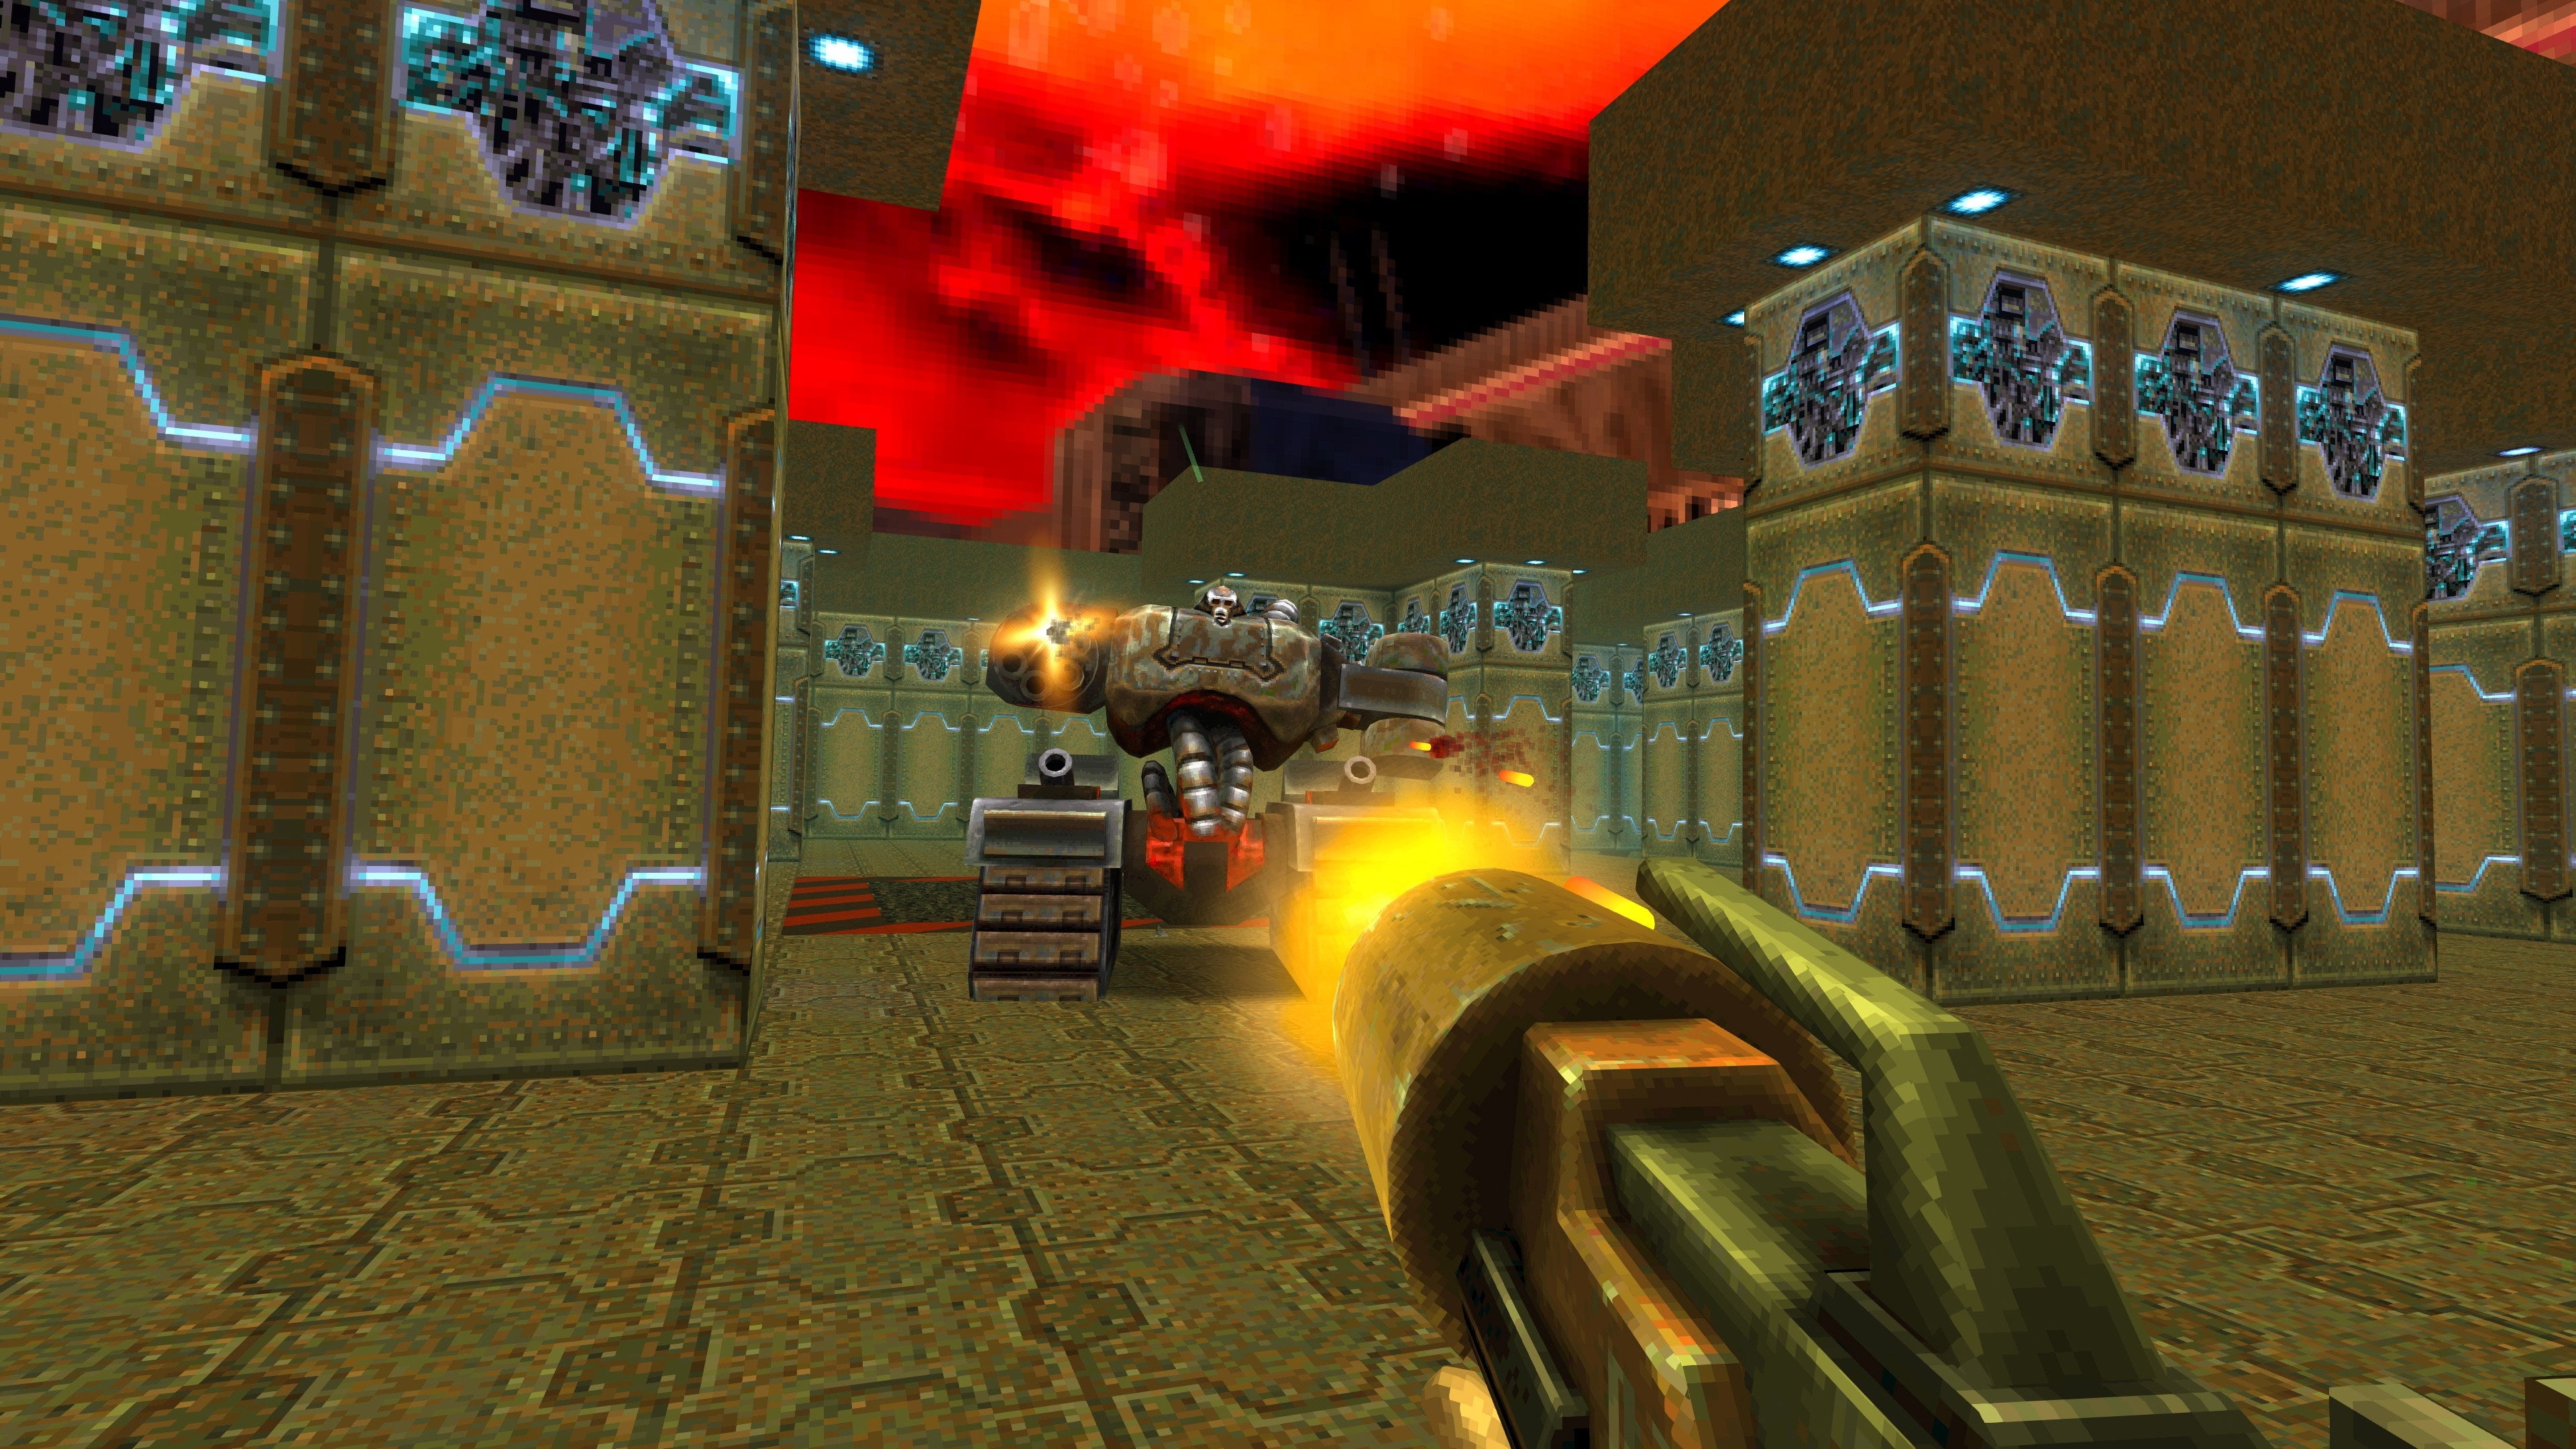 Quake 2 remaster released, includes Quake 2 64 and new expansion Rock Paper Shotgun